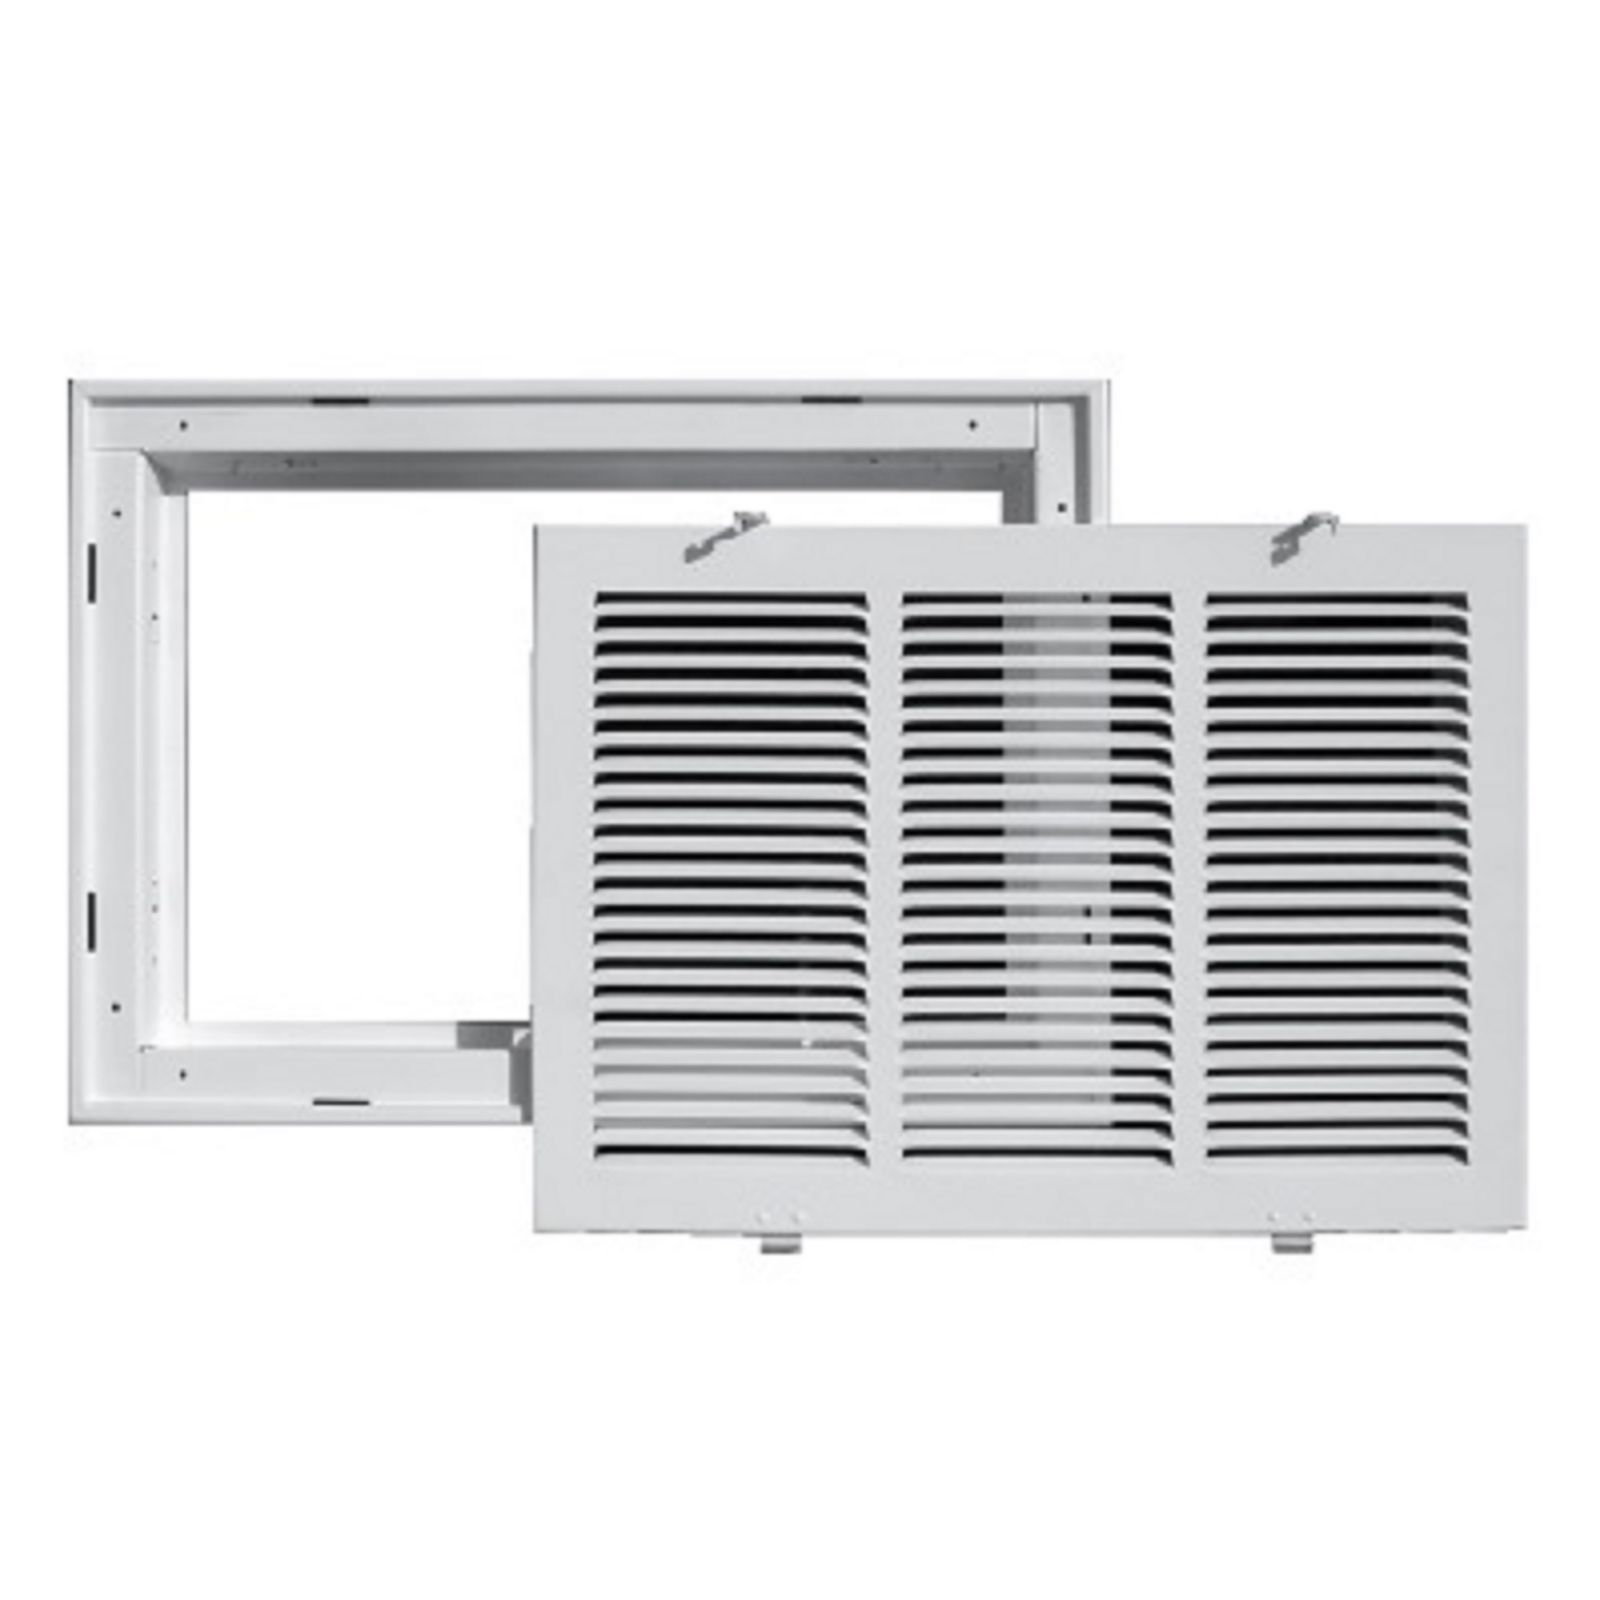 TRUaire 190RF 30X08 - Steel Return Air Filter Grille With Removable Face, White, 30" X 08"